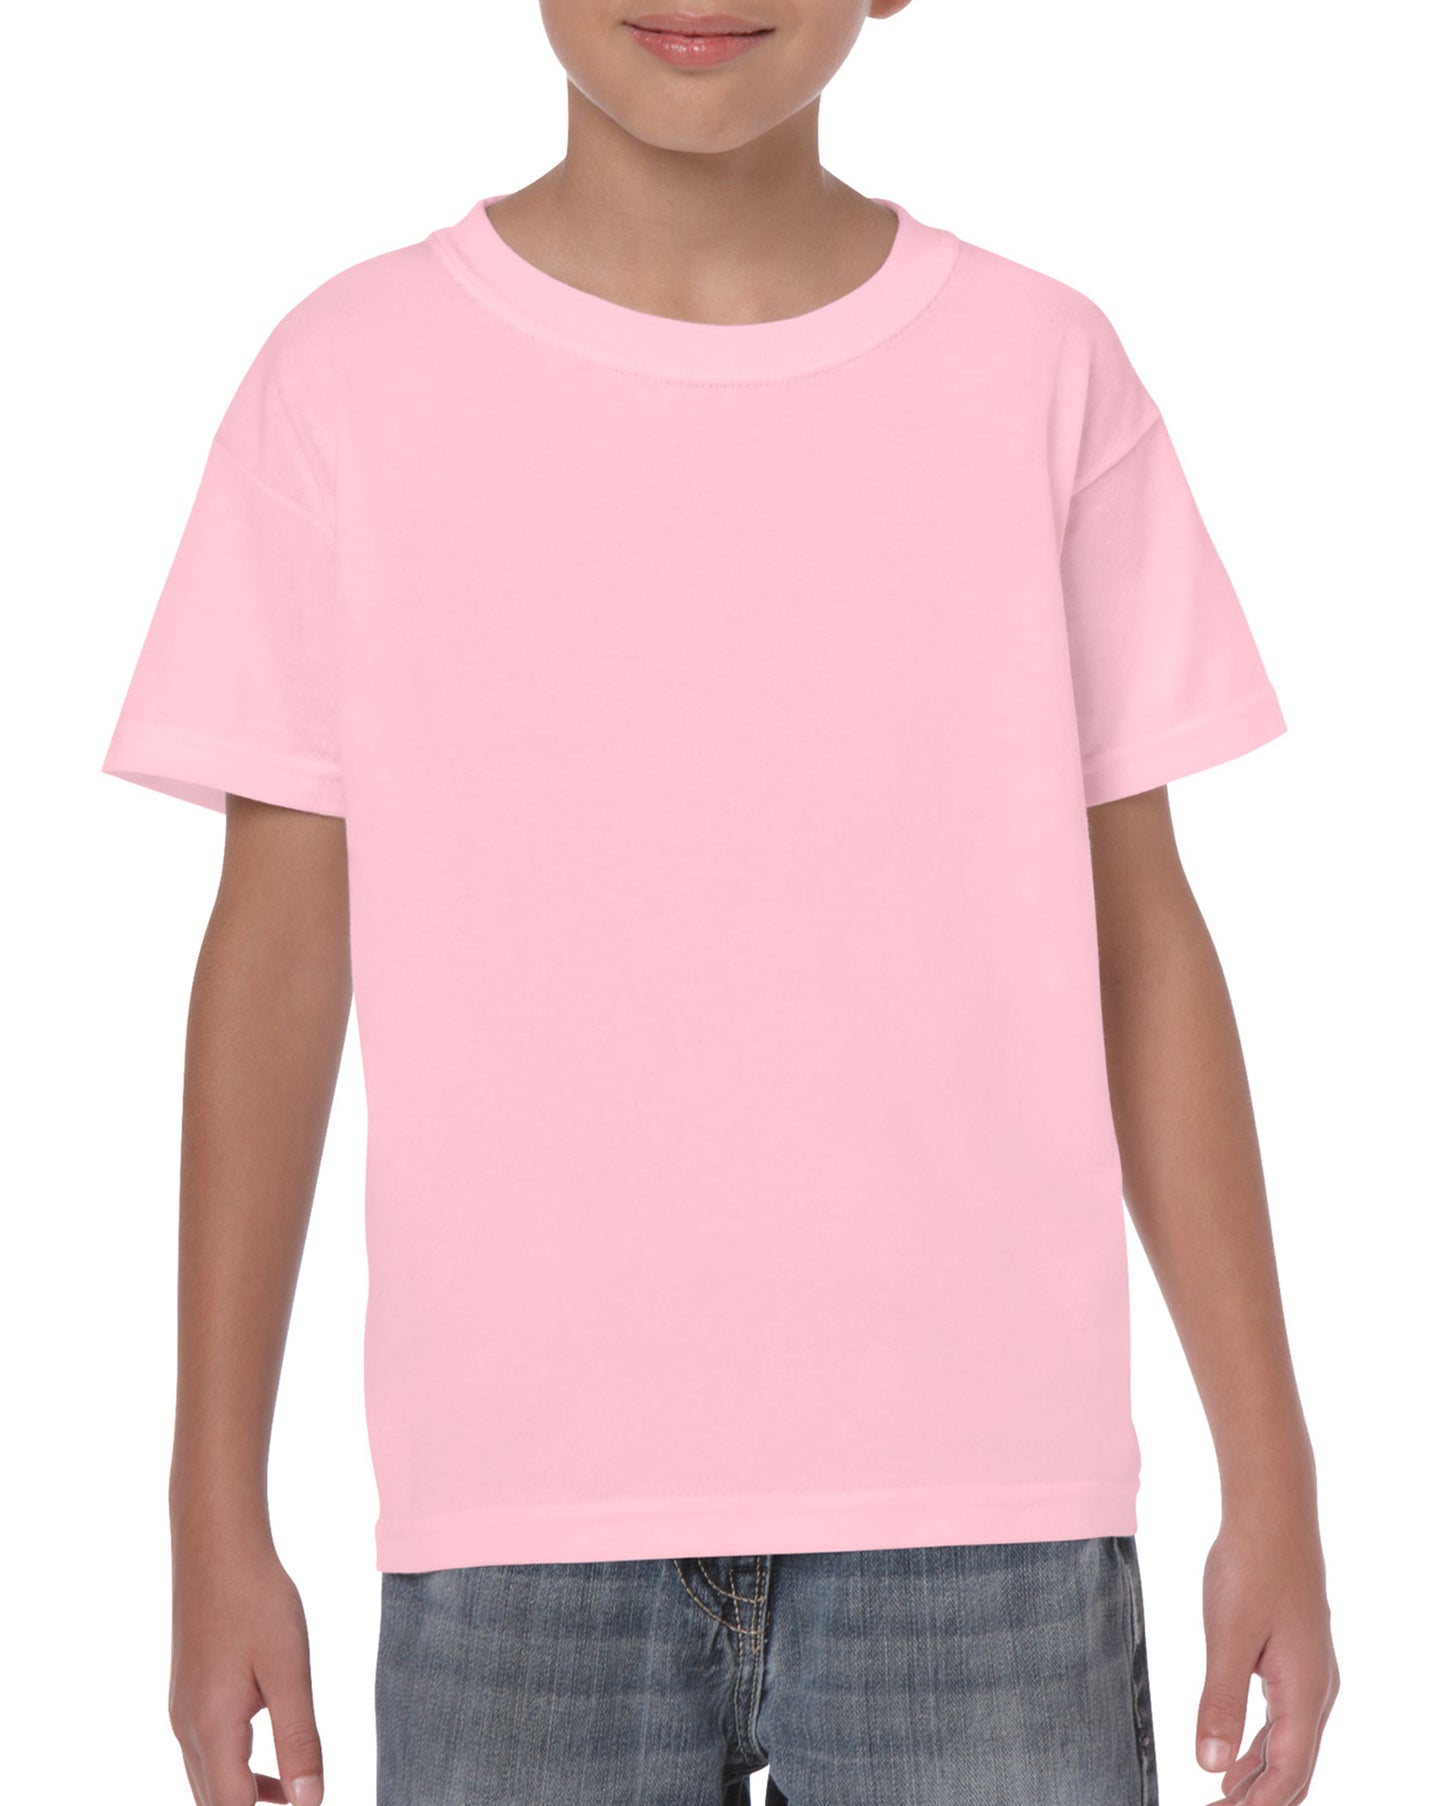 Youth Heavy Cotton Tees